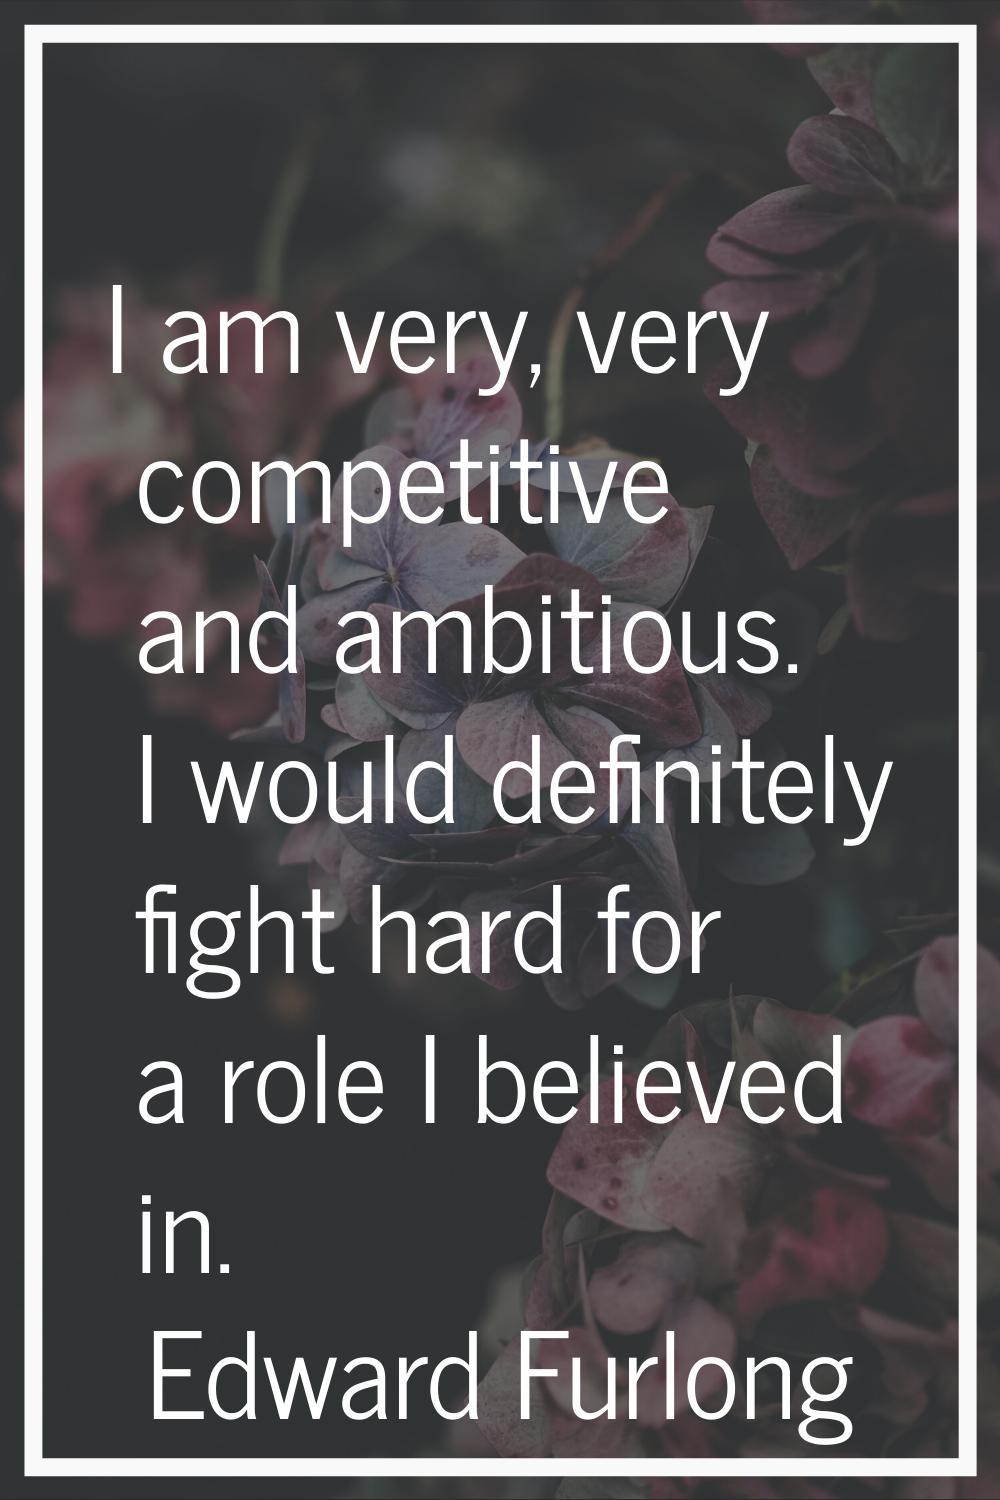 I am very, very competitive and ambitious. I would definitely fight hard for a role I believed in.